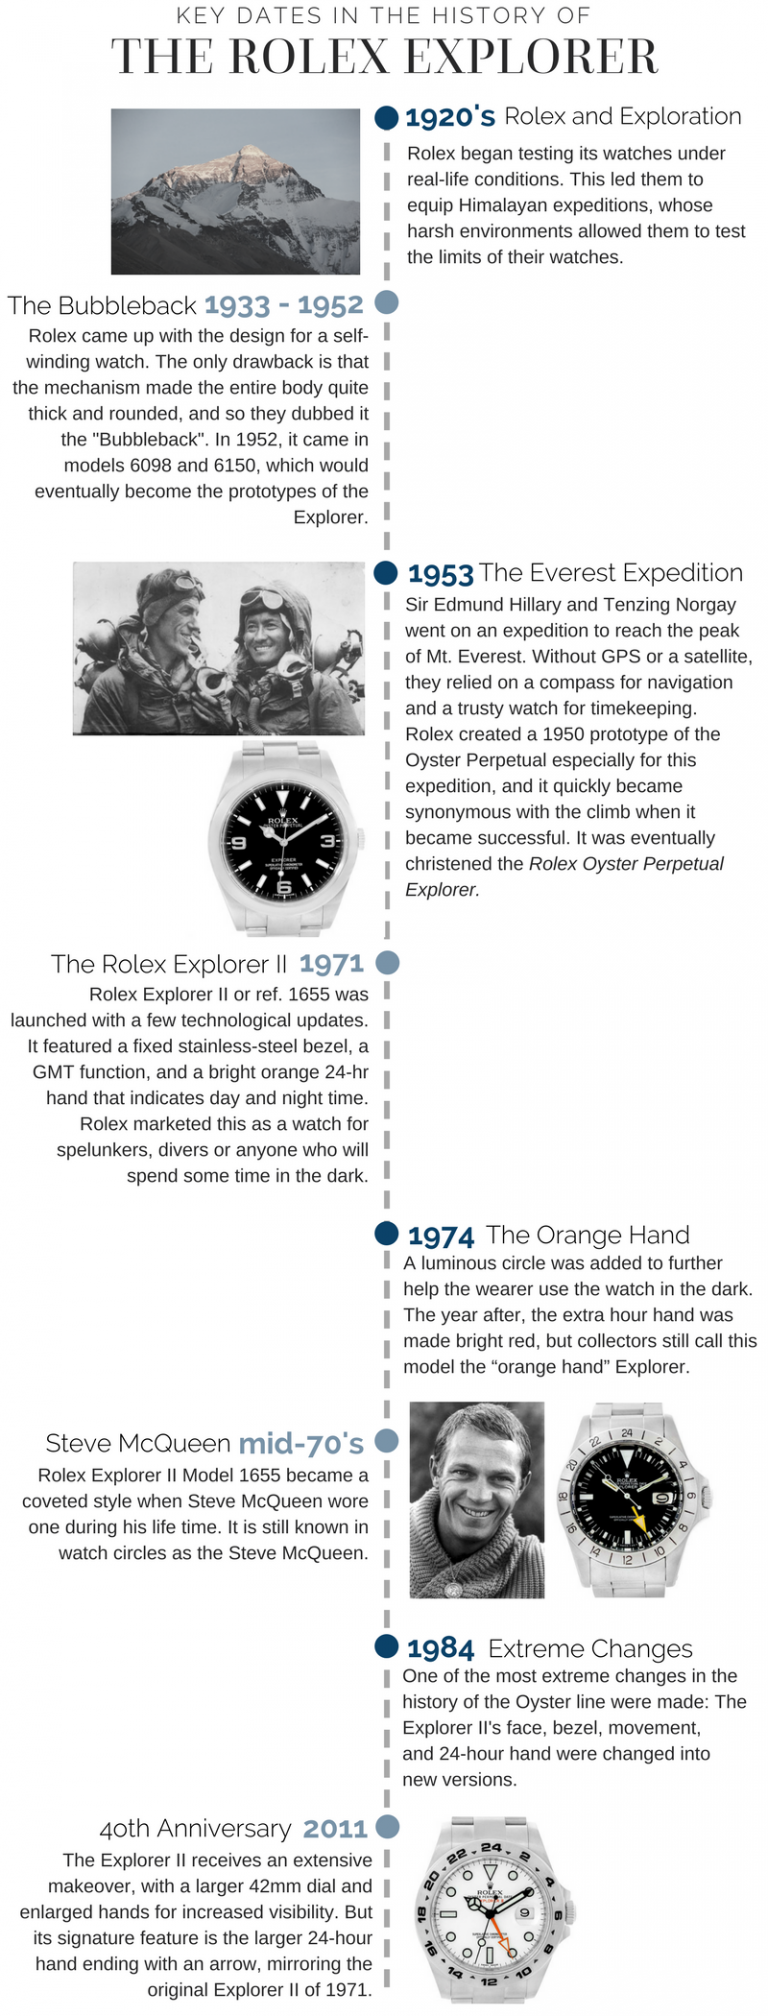 The Evolution of the Rolex Explorer | The Watch Club by SwissWatchExpo